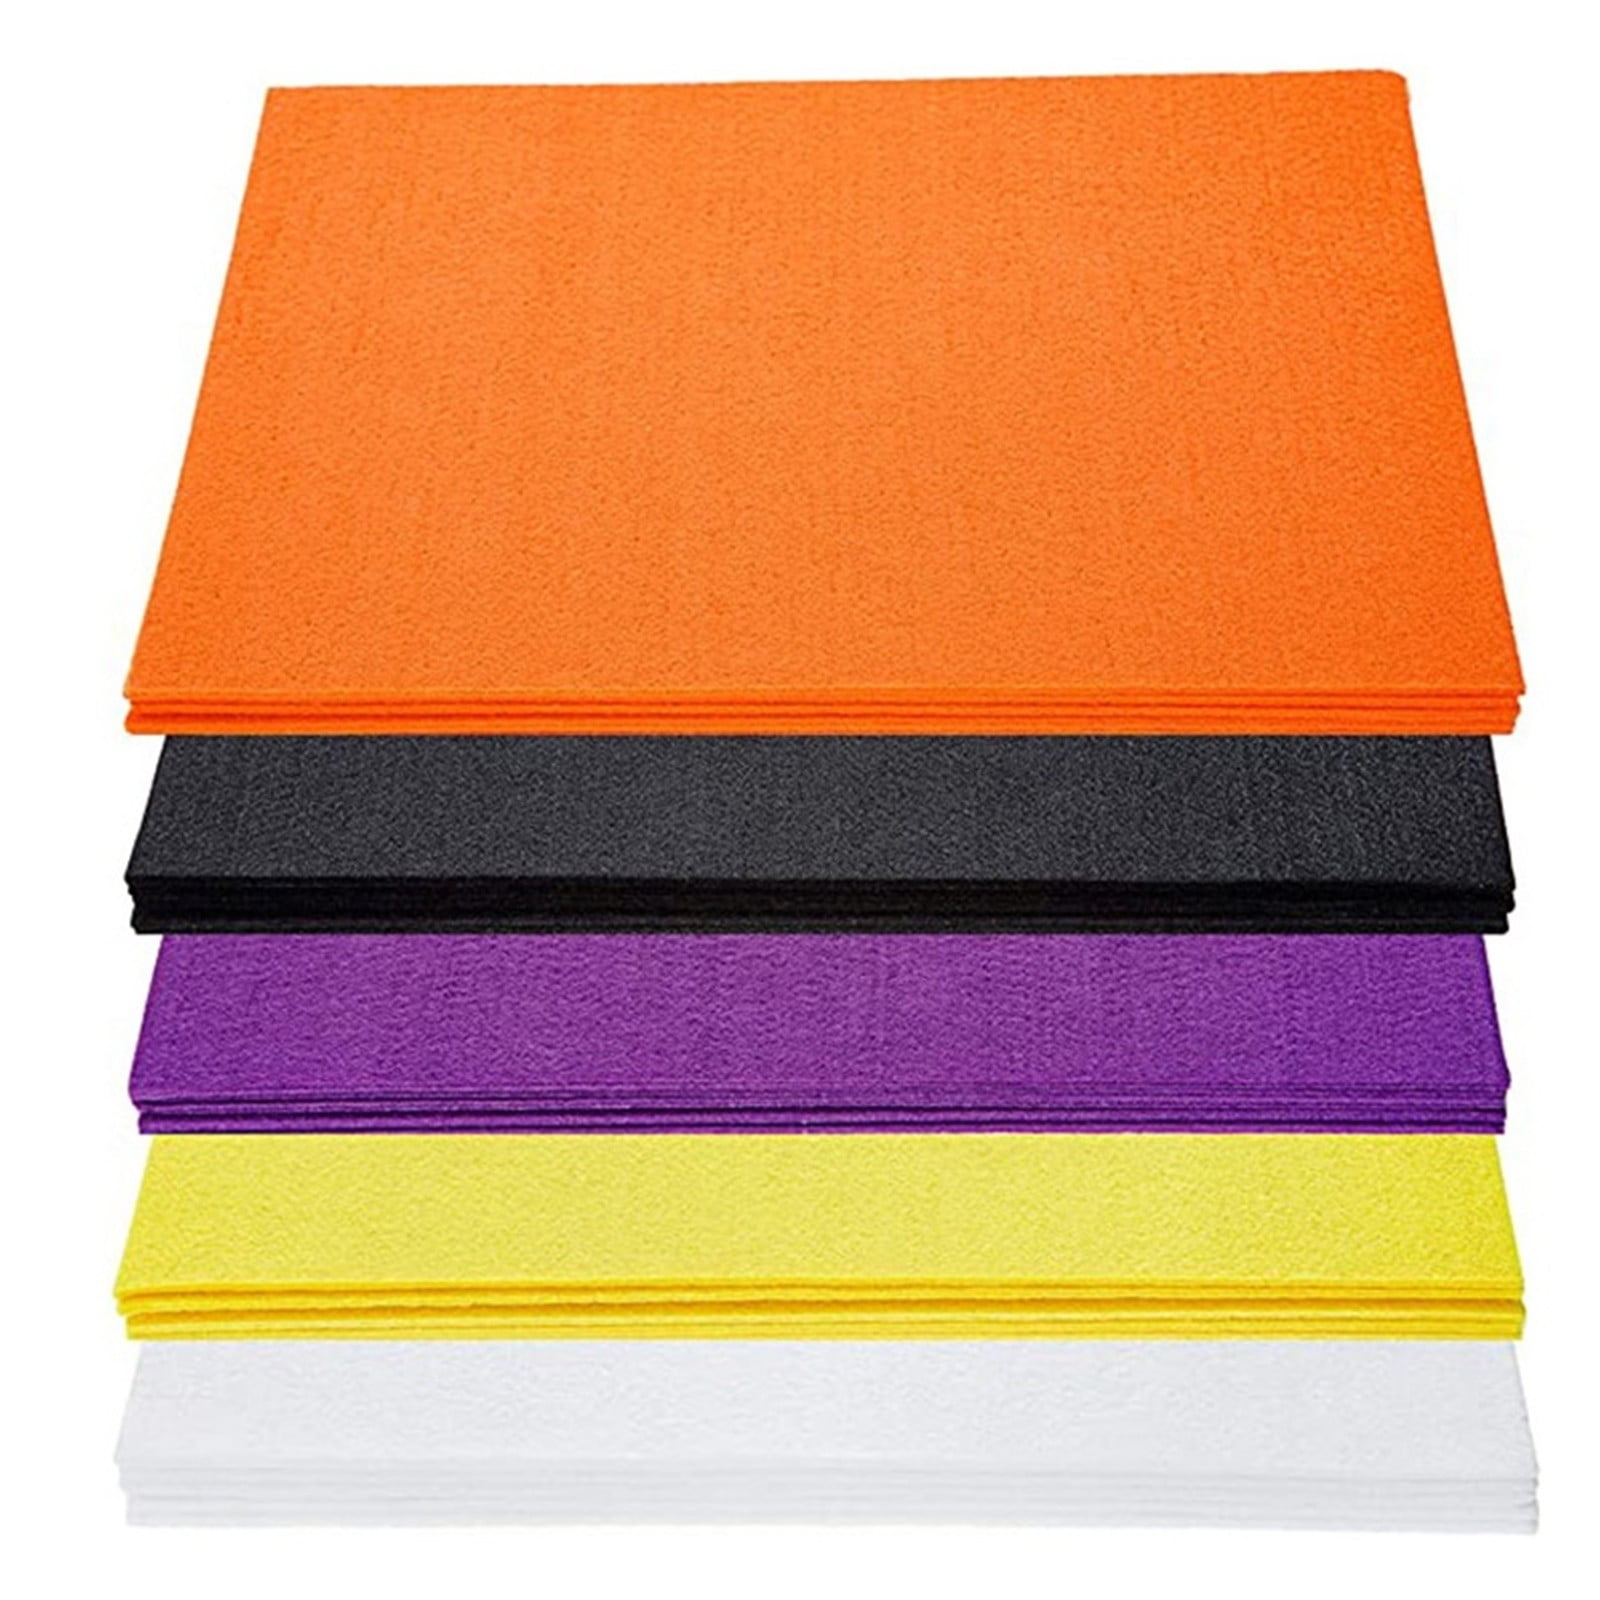 Felt Sheets, Color: Tomato, Material: Polyester and acrylic, Dimension: 12  x 10 inches / 30cm x 25cm, Thickness: Approx 1.0 mm / 0.04 inch, Brand:  Avanti. 